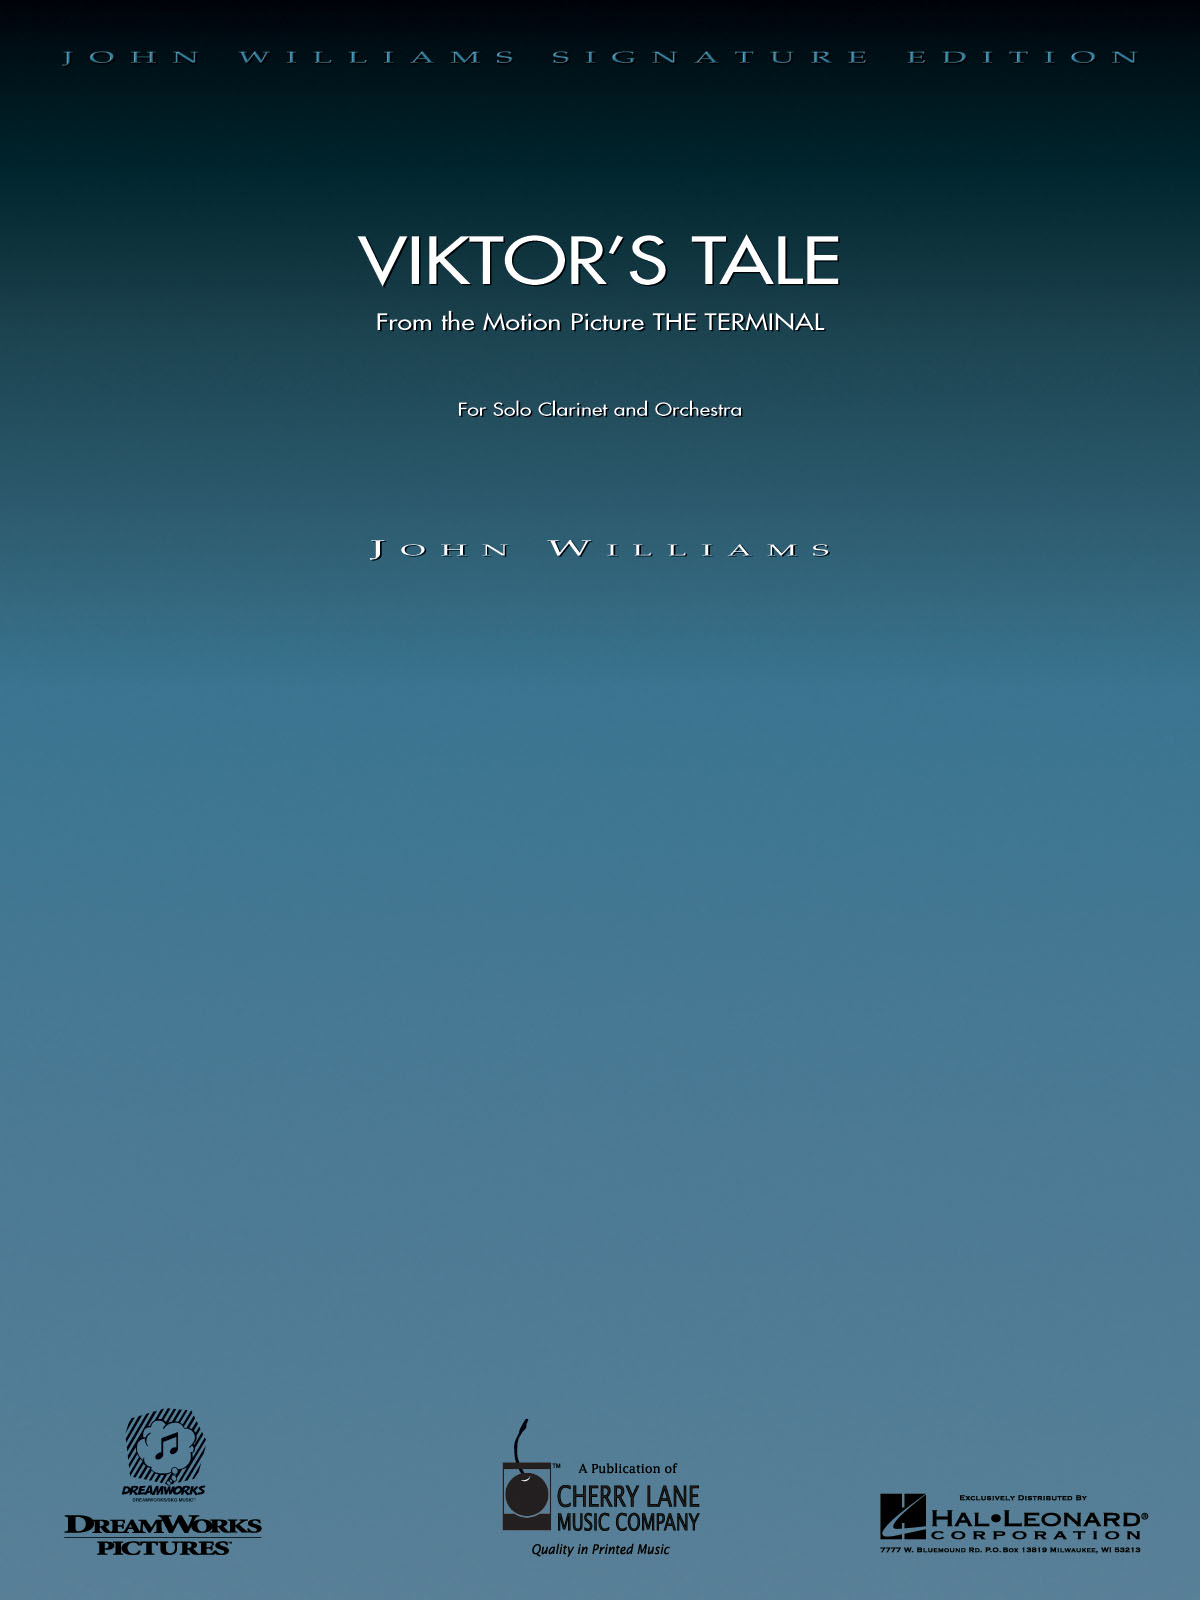 Viktor’s Tale from the Terminal